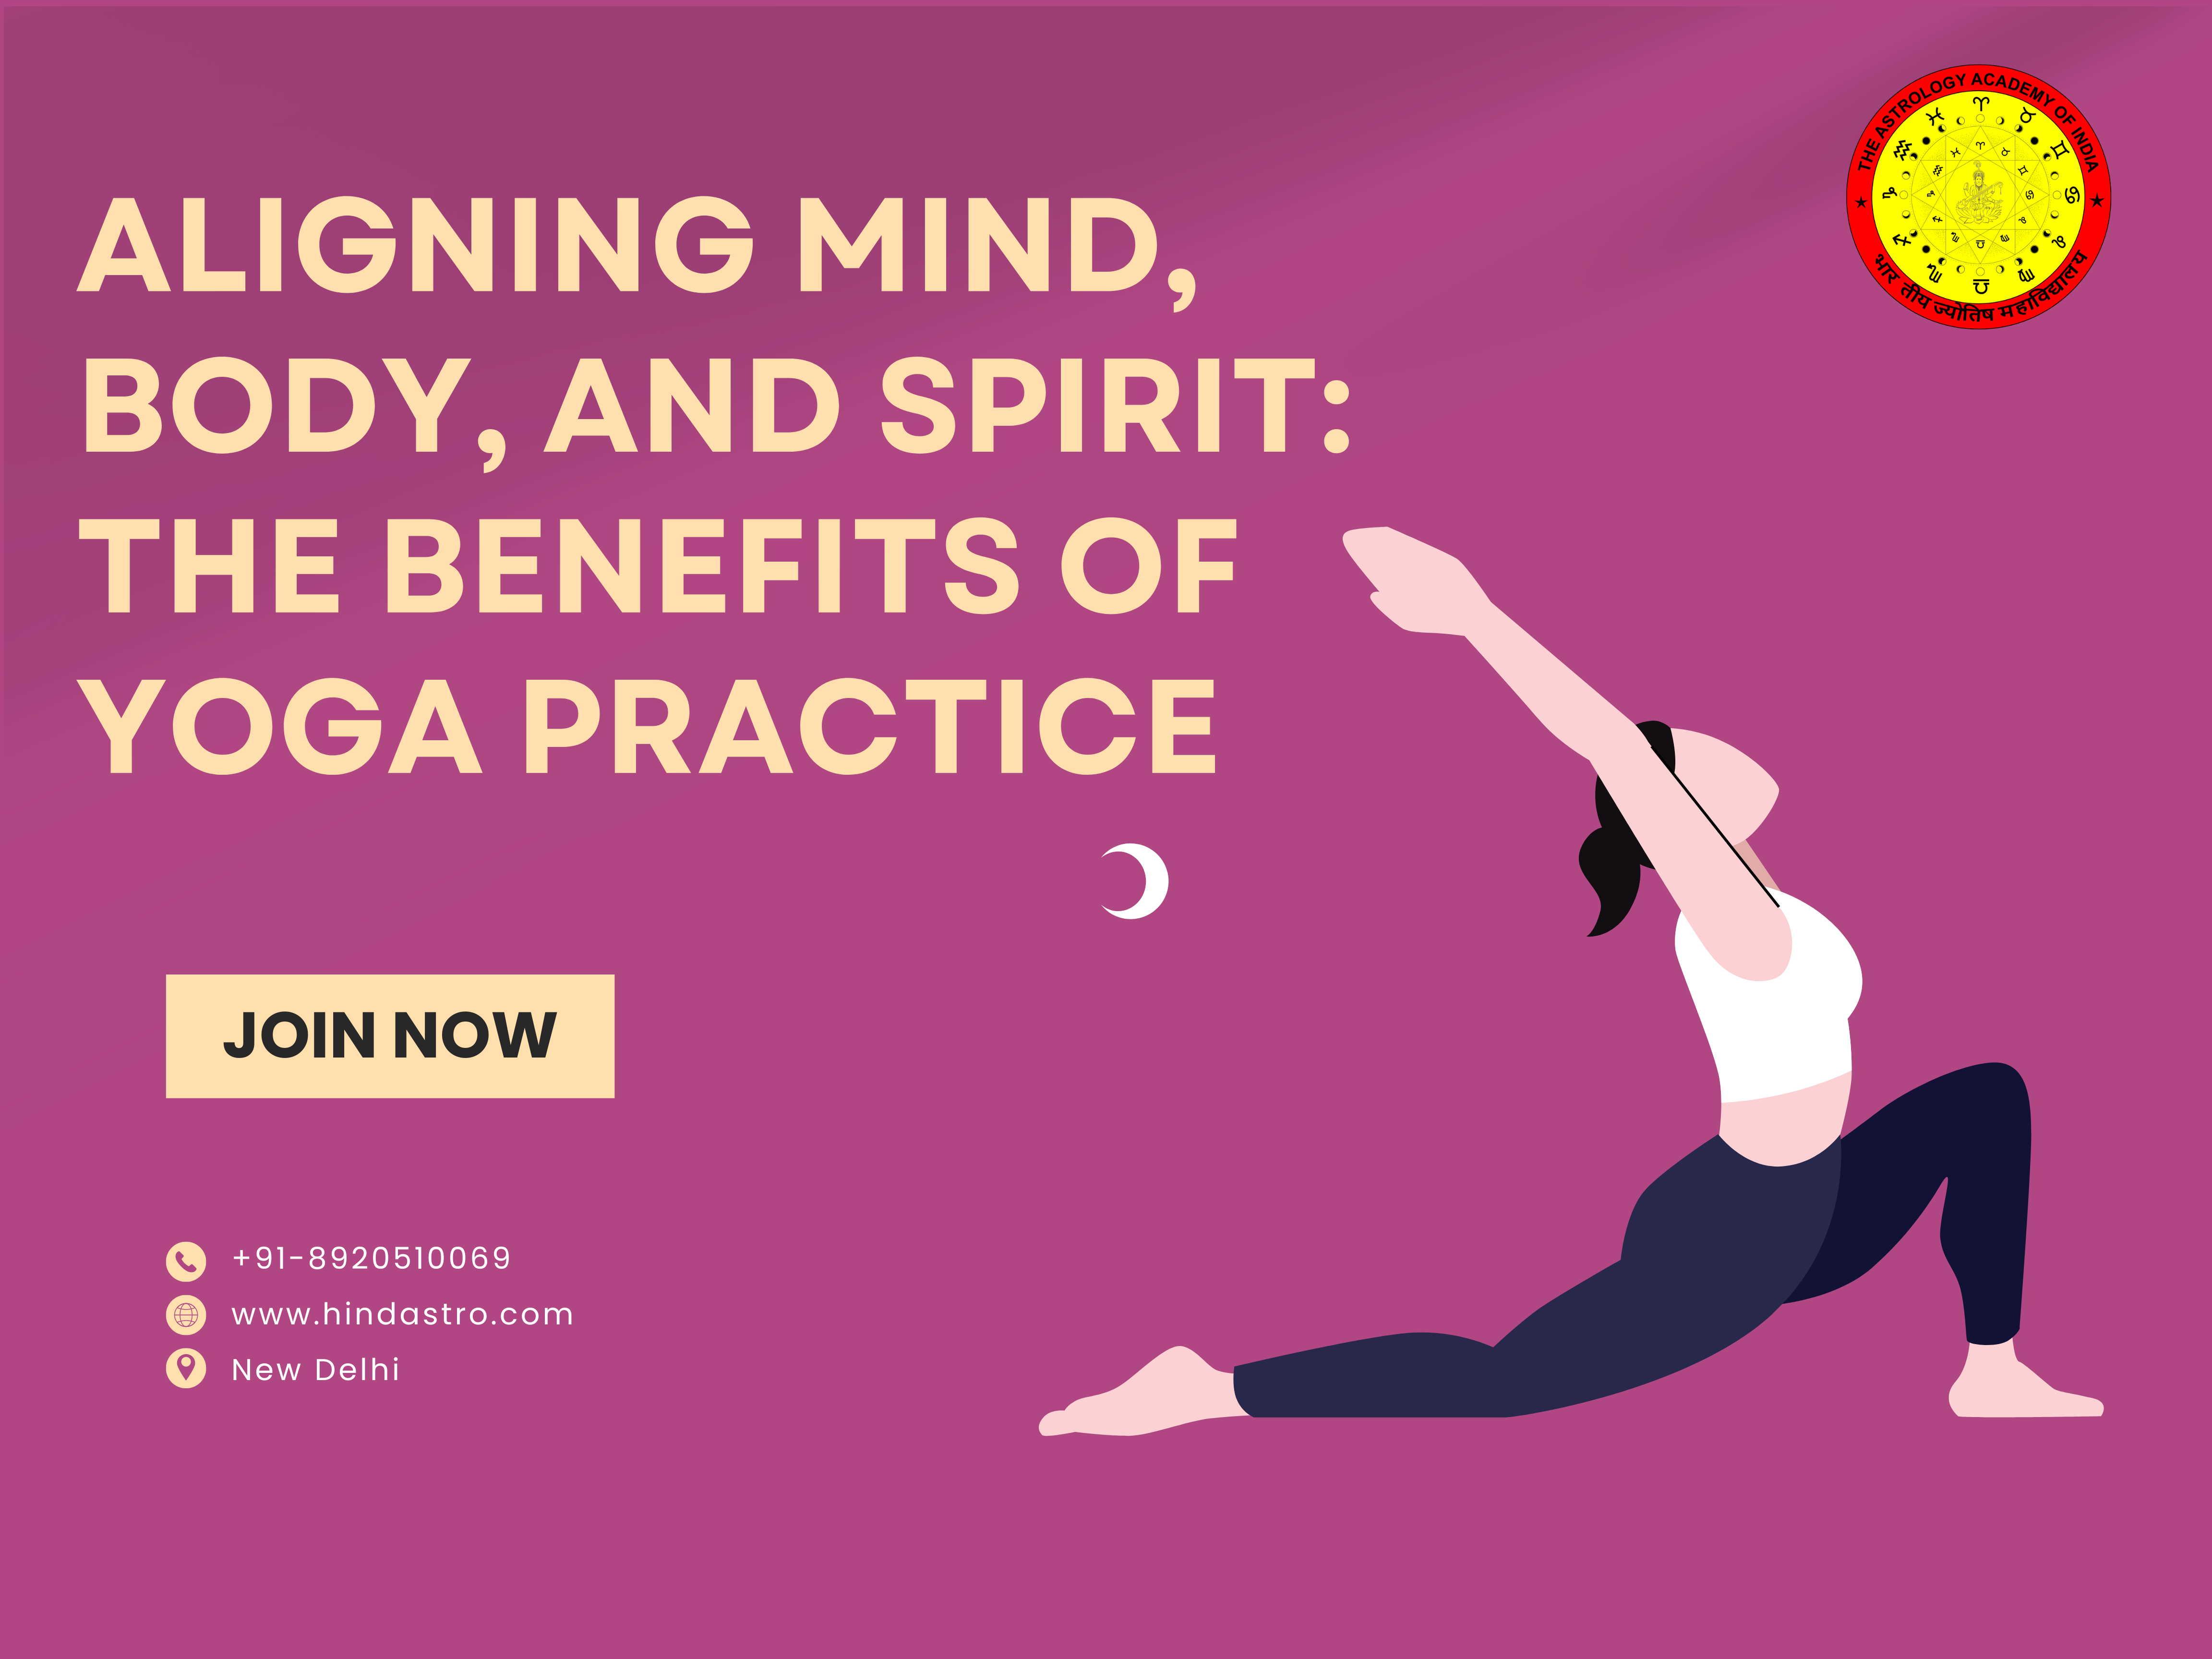 The Benefit of Yoga Practice: Aligning Mind, Body and Spirit